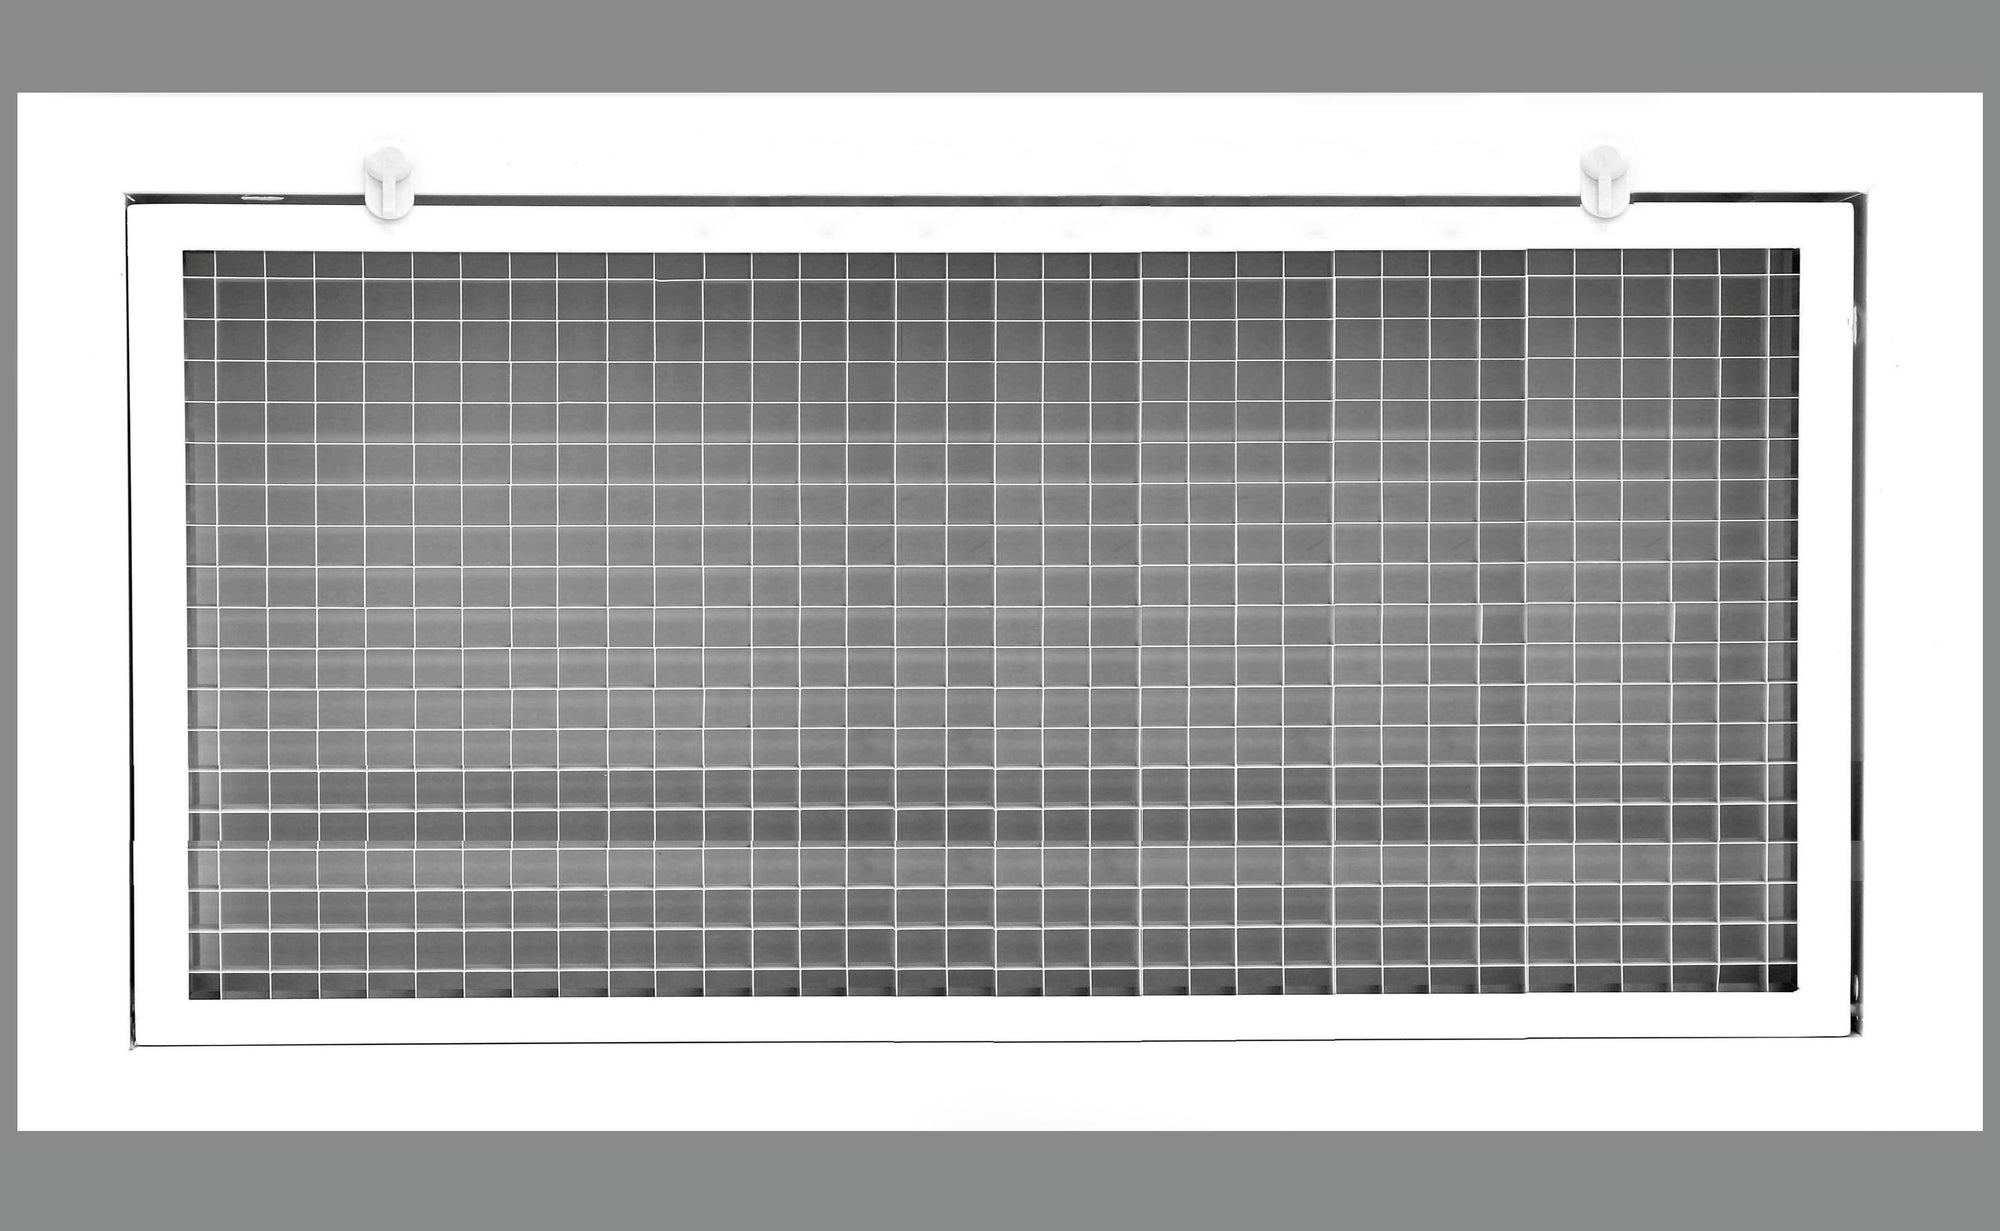 36" x 20" Cube Core Eggcrate Return Air Filter Grille for 1" Filter